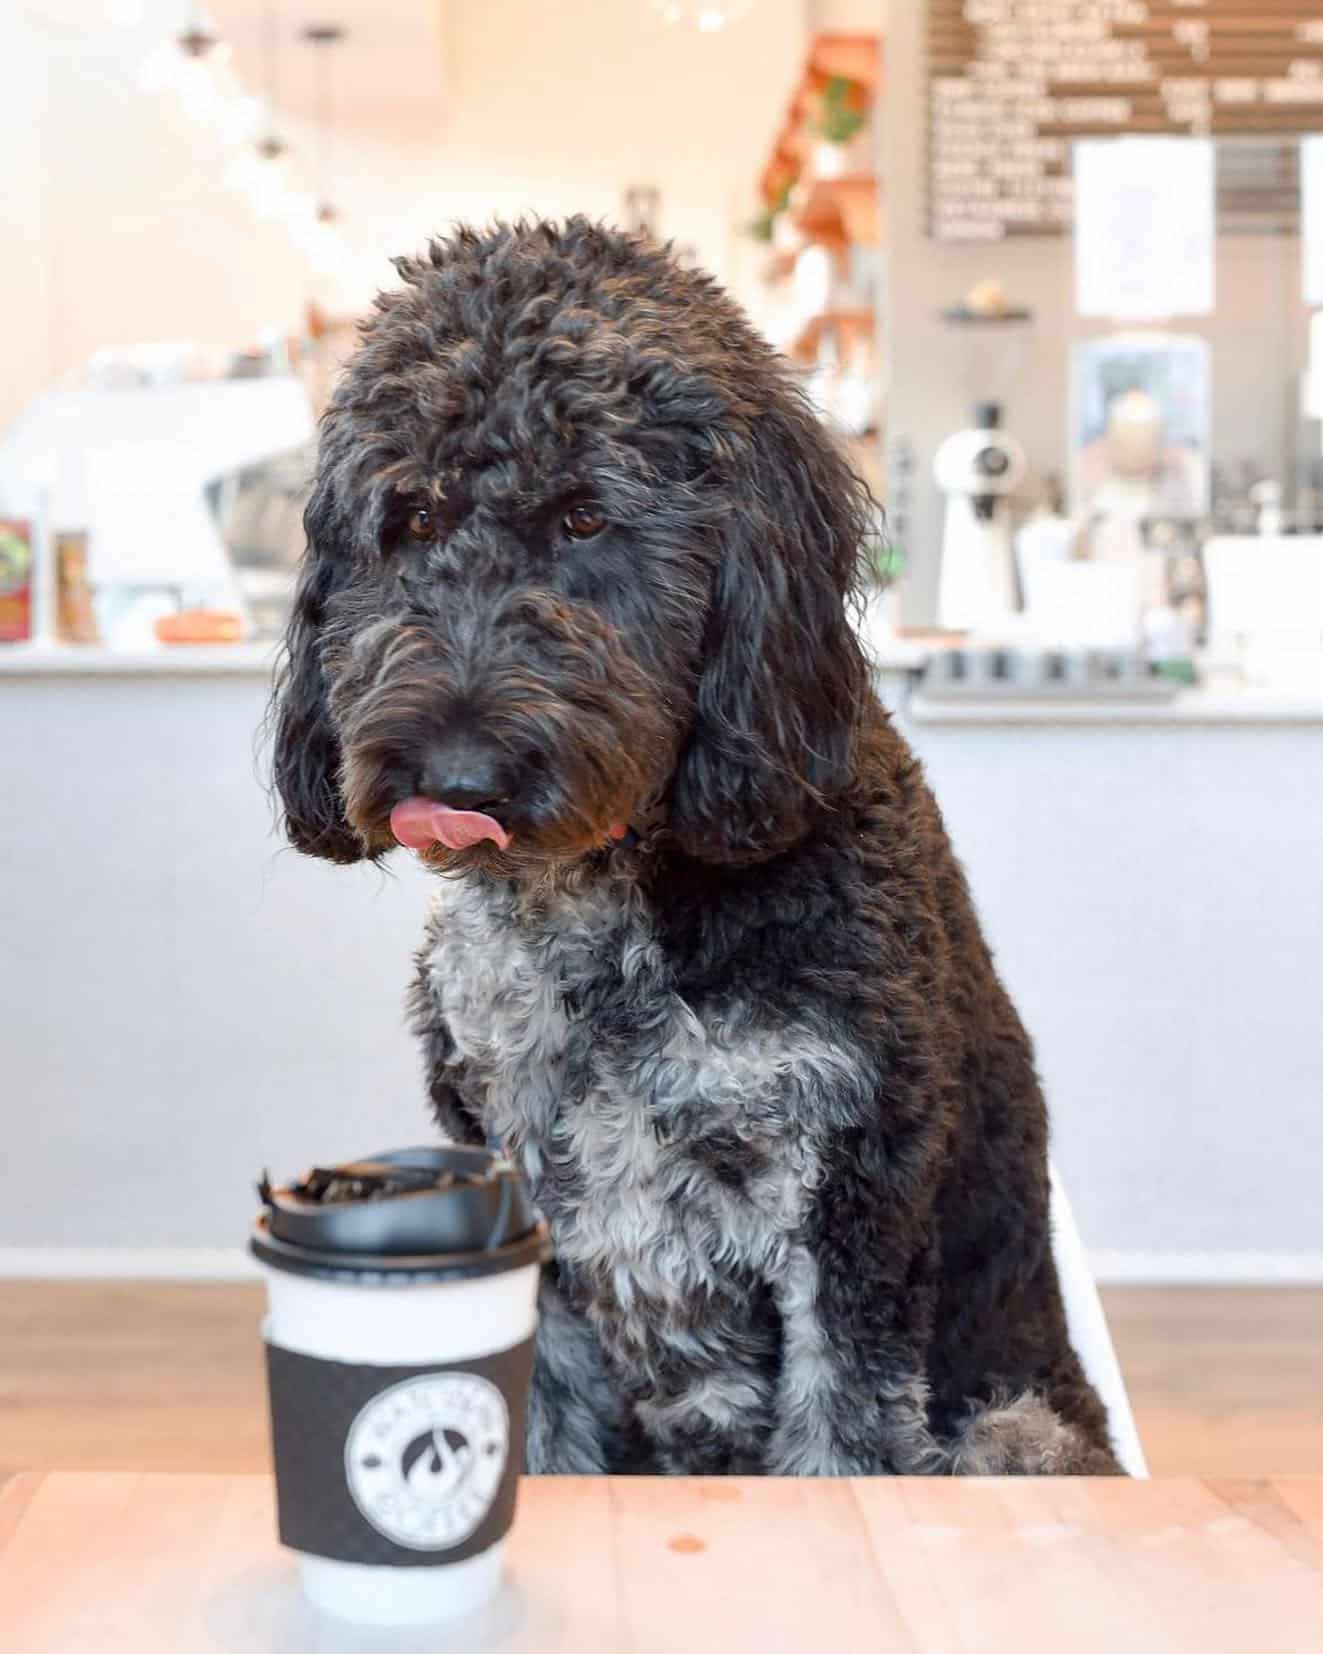 Ruff day? Don’t let the Monday blues get ya down…stop by @waterbeancoffee for a midday pick-me-up!